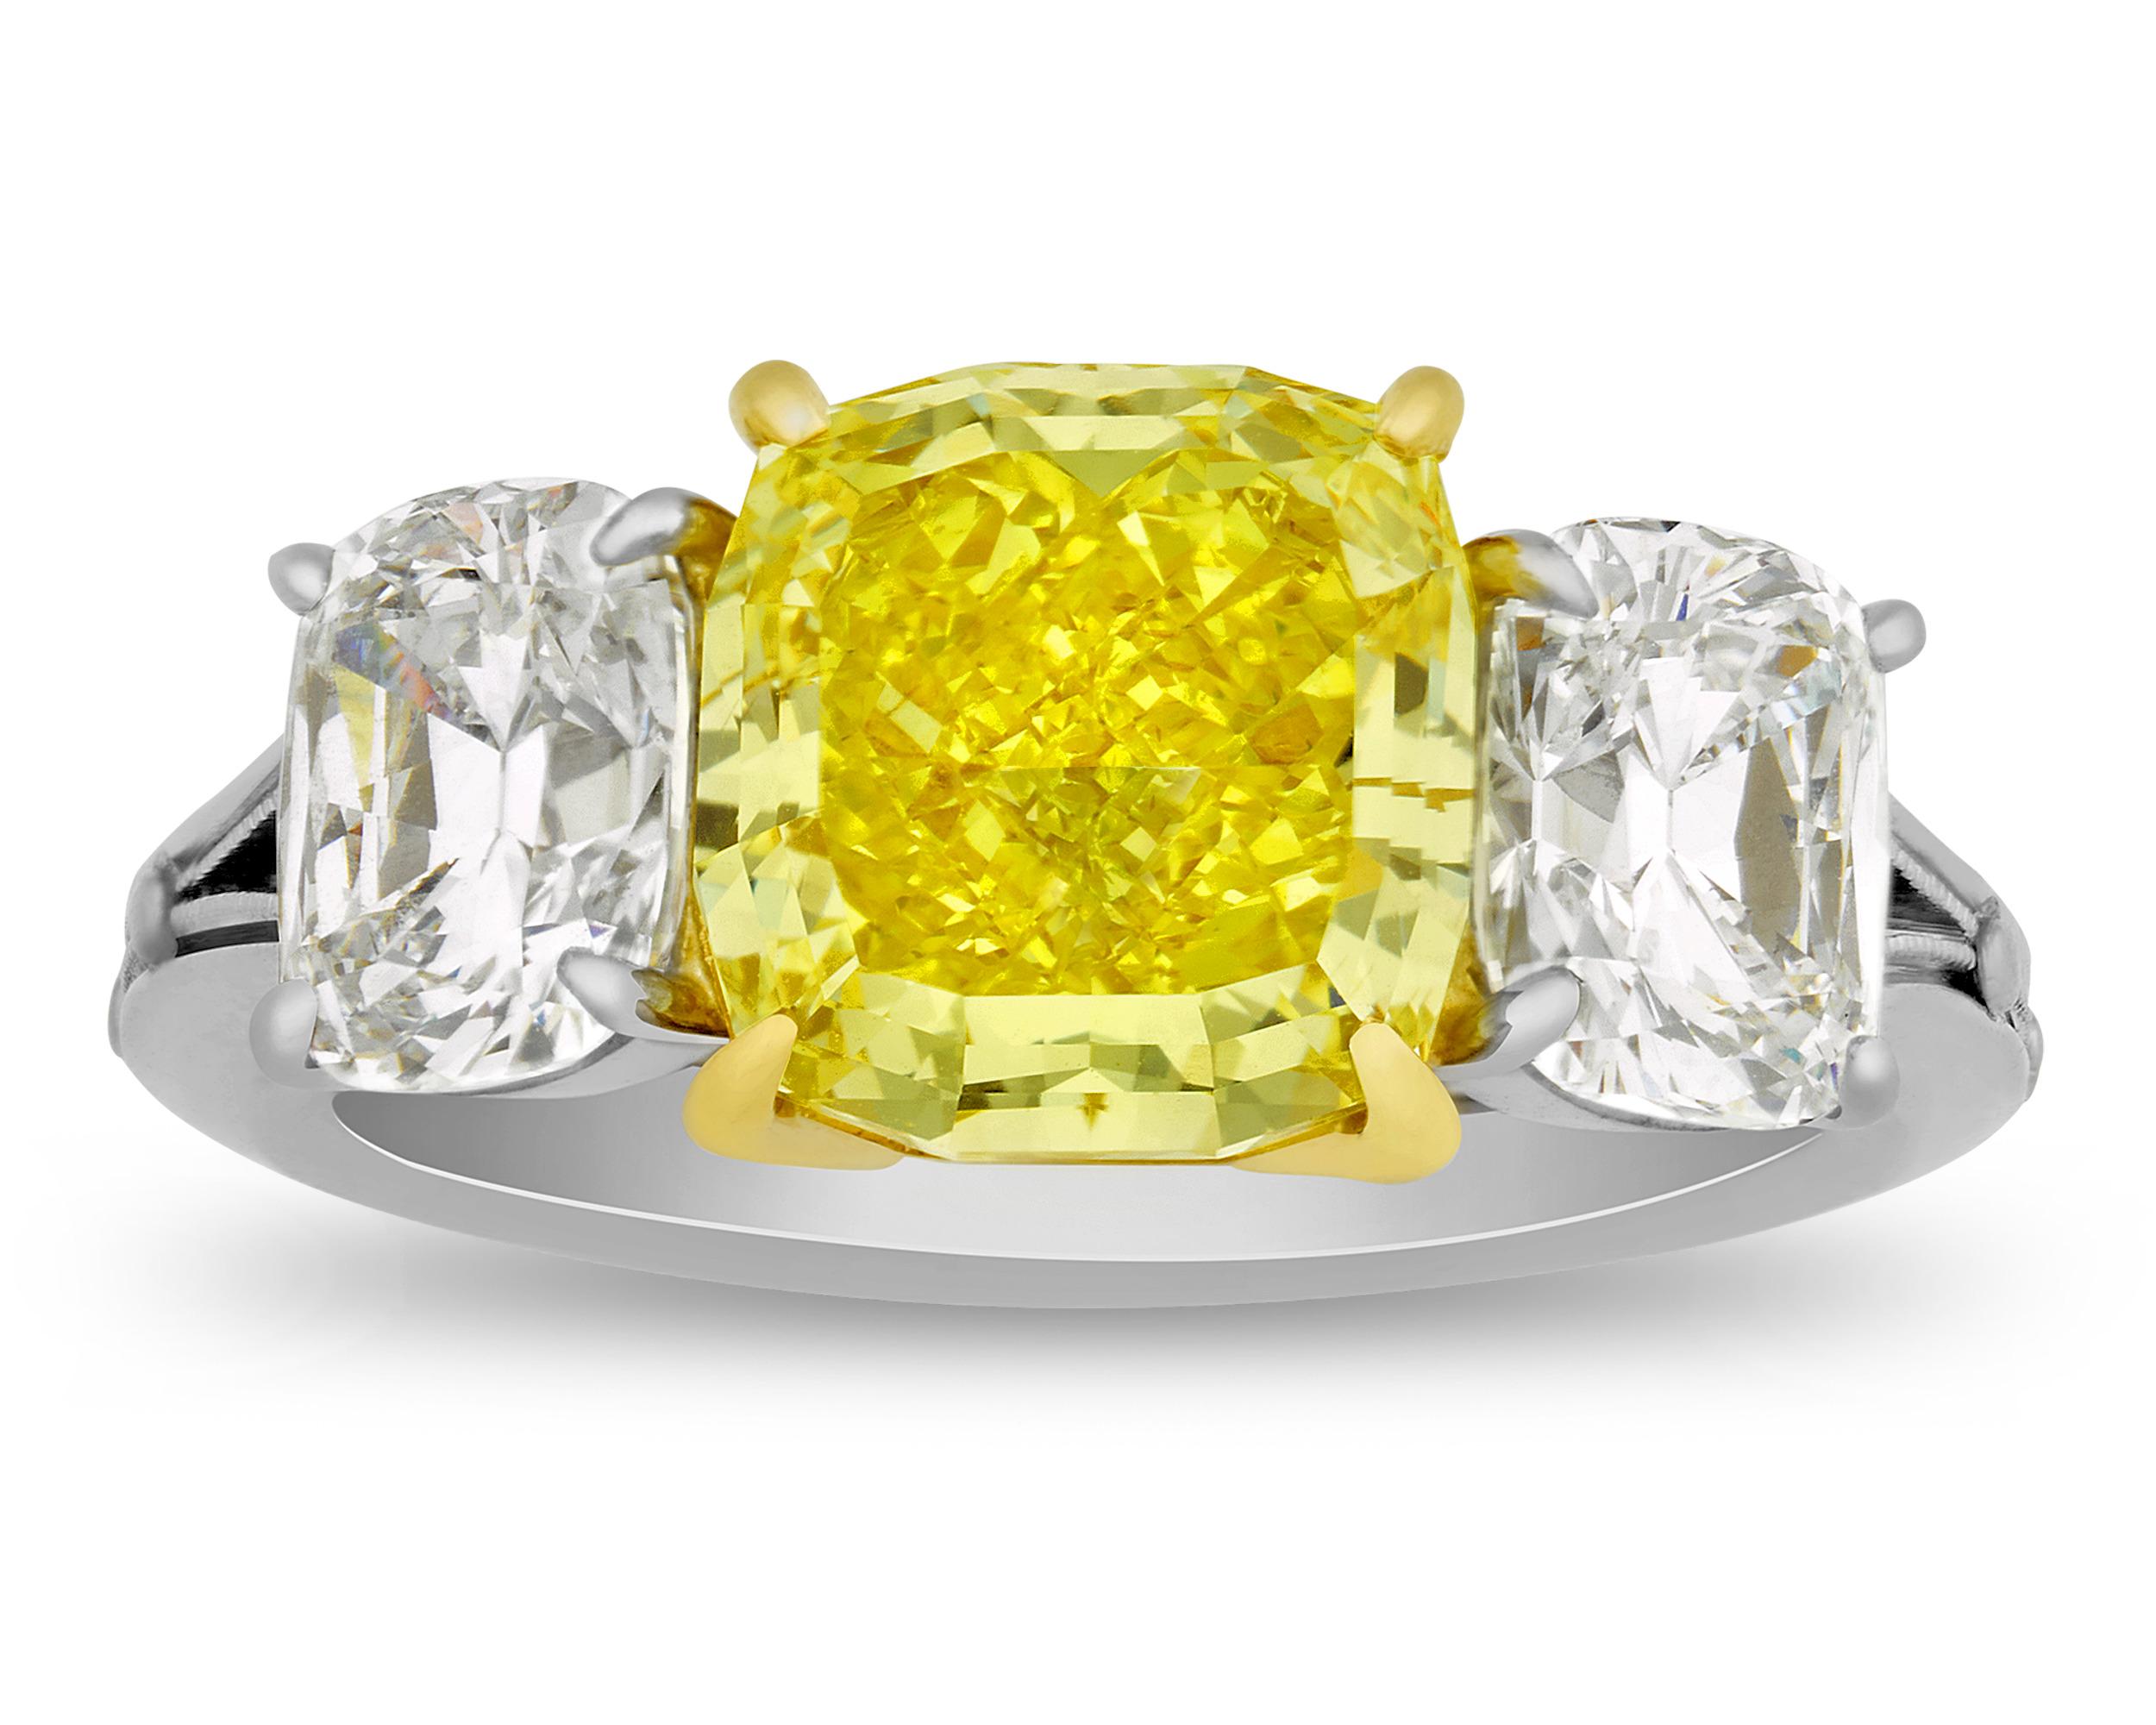 A dazzling 3.70-carat fancy vivid yellow diamond displays an extraordinary yellow hue in this ring. The mixed-cut diamond is certified by the Gemological Institute of America as Natural Fancy Vivid Yellow, the highest color grade in the realm of